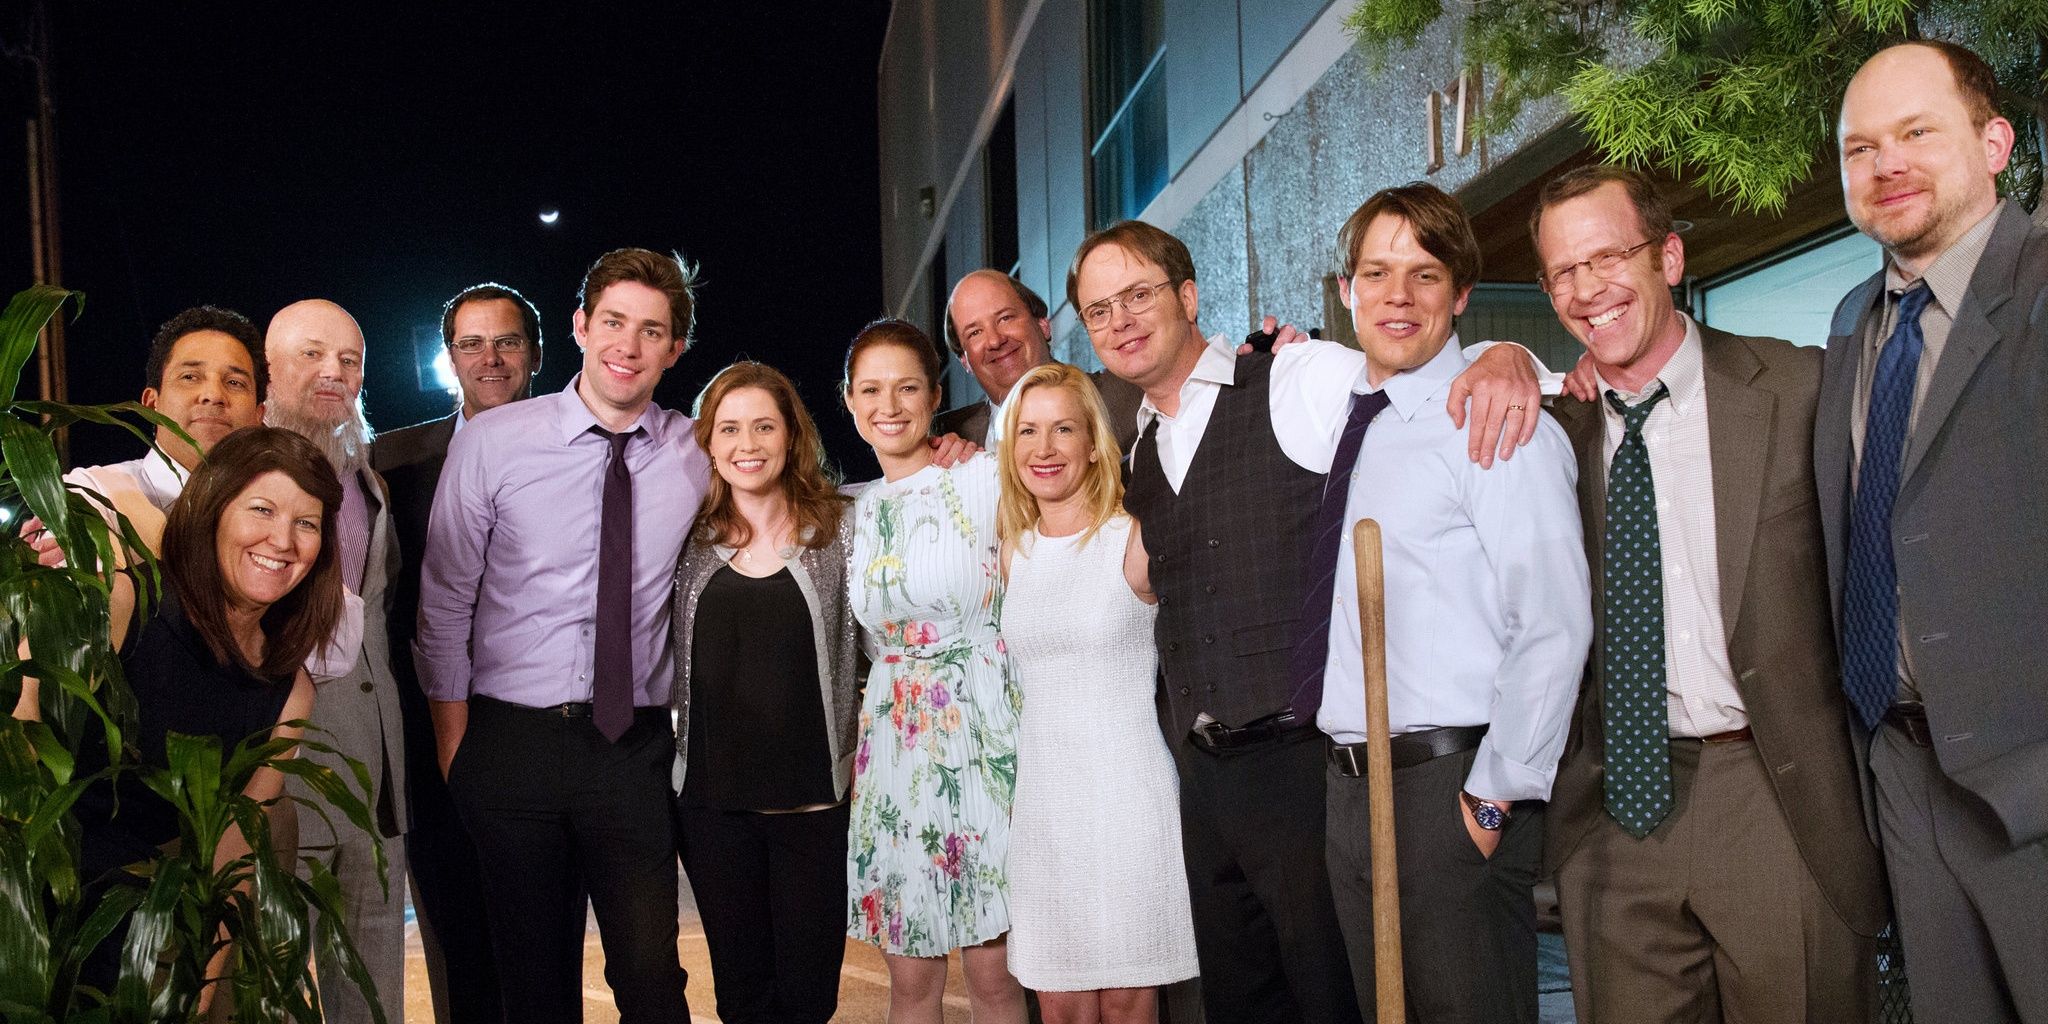 Here's the Cast of The Office, from Seasons 1 Through 9